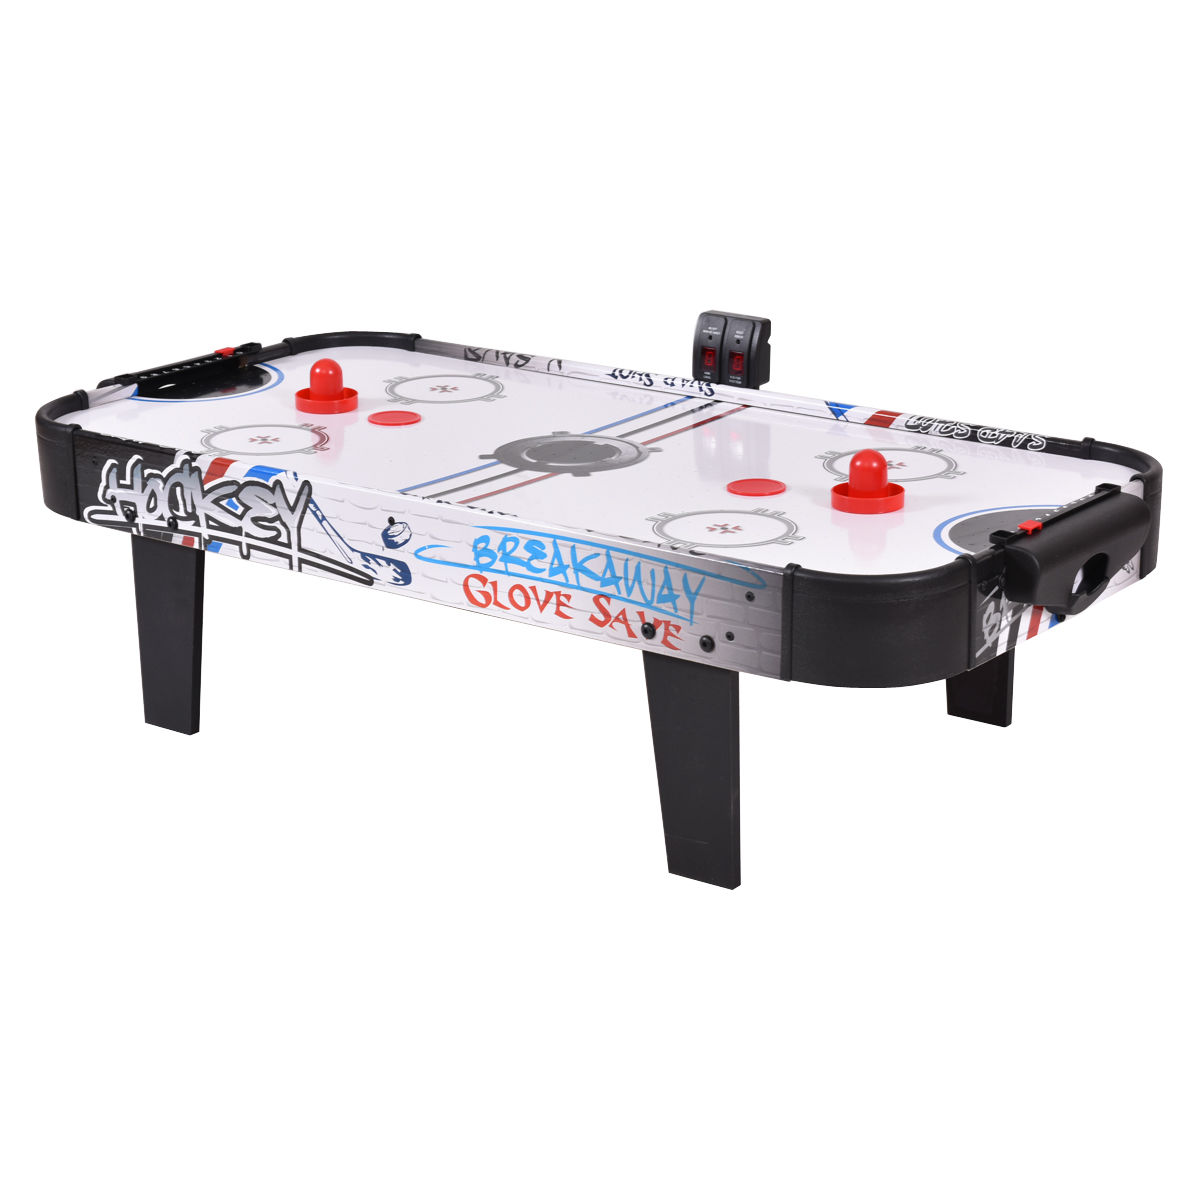 Costway 42''Air Powered Hockey Table Game Room Indoor Sport Electronic Scoring 2 Pushers - image 3 of 9